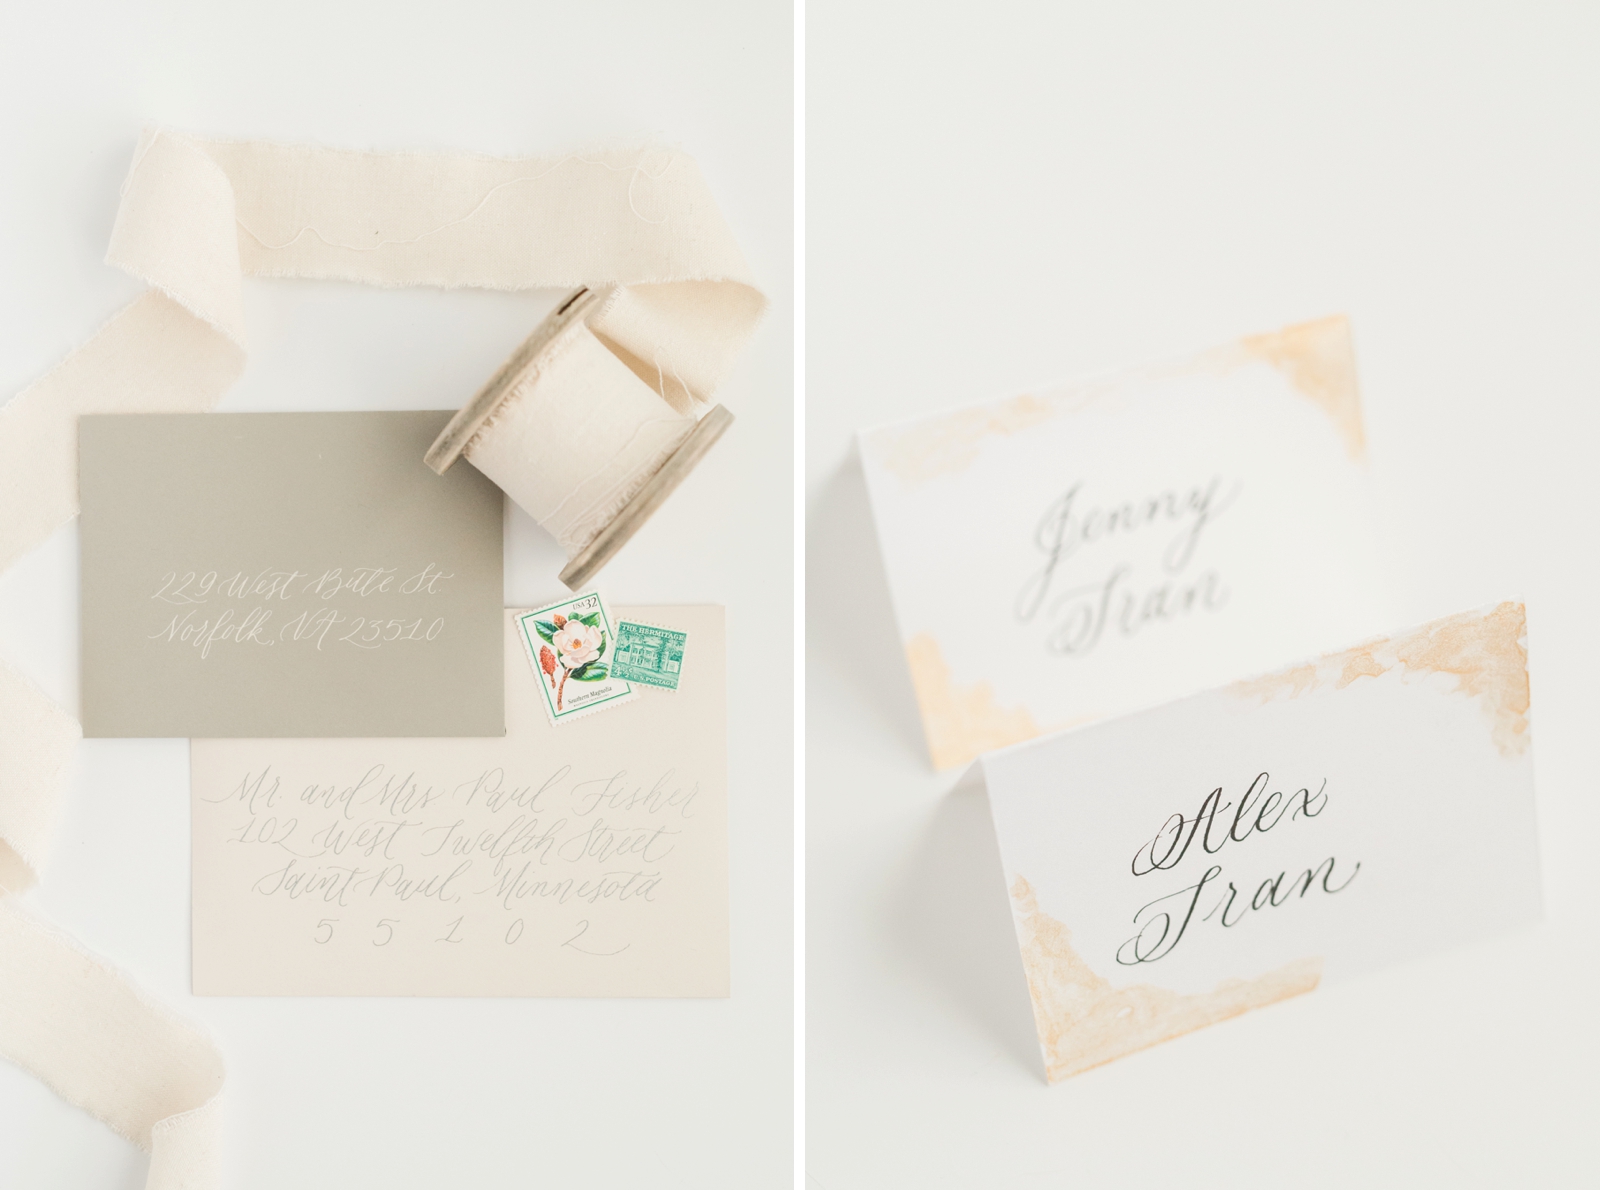 tips-for-designing-your-wedding-stationary-from-letterlyn-studio_3972.jpg